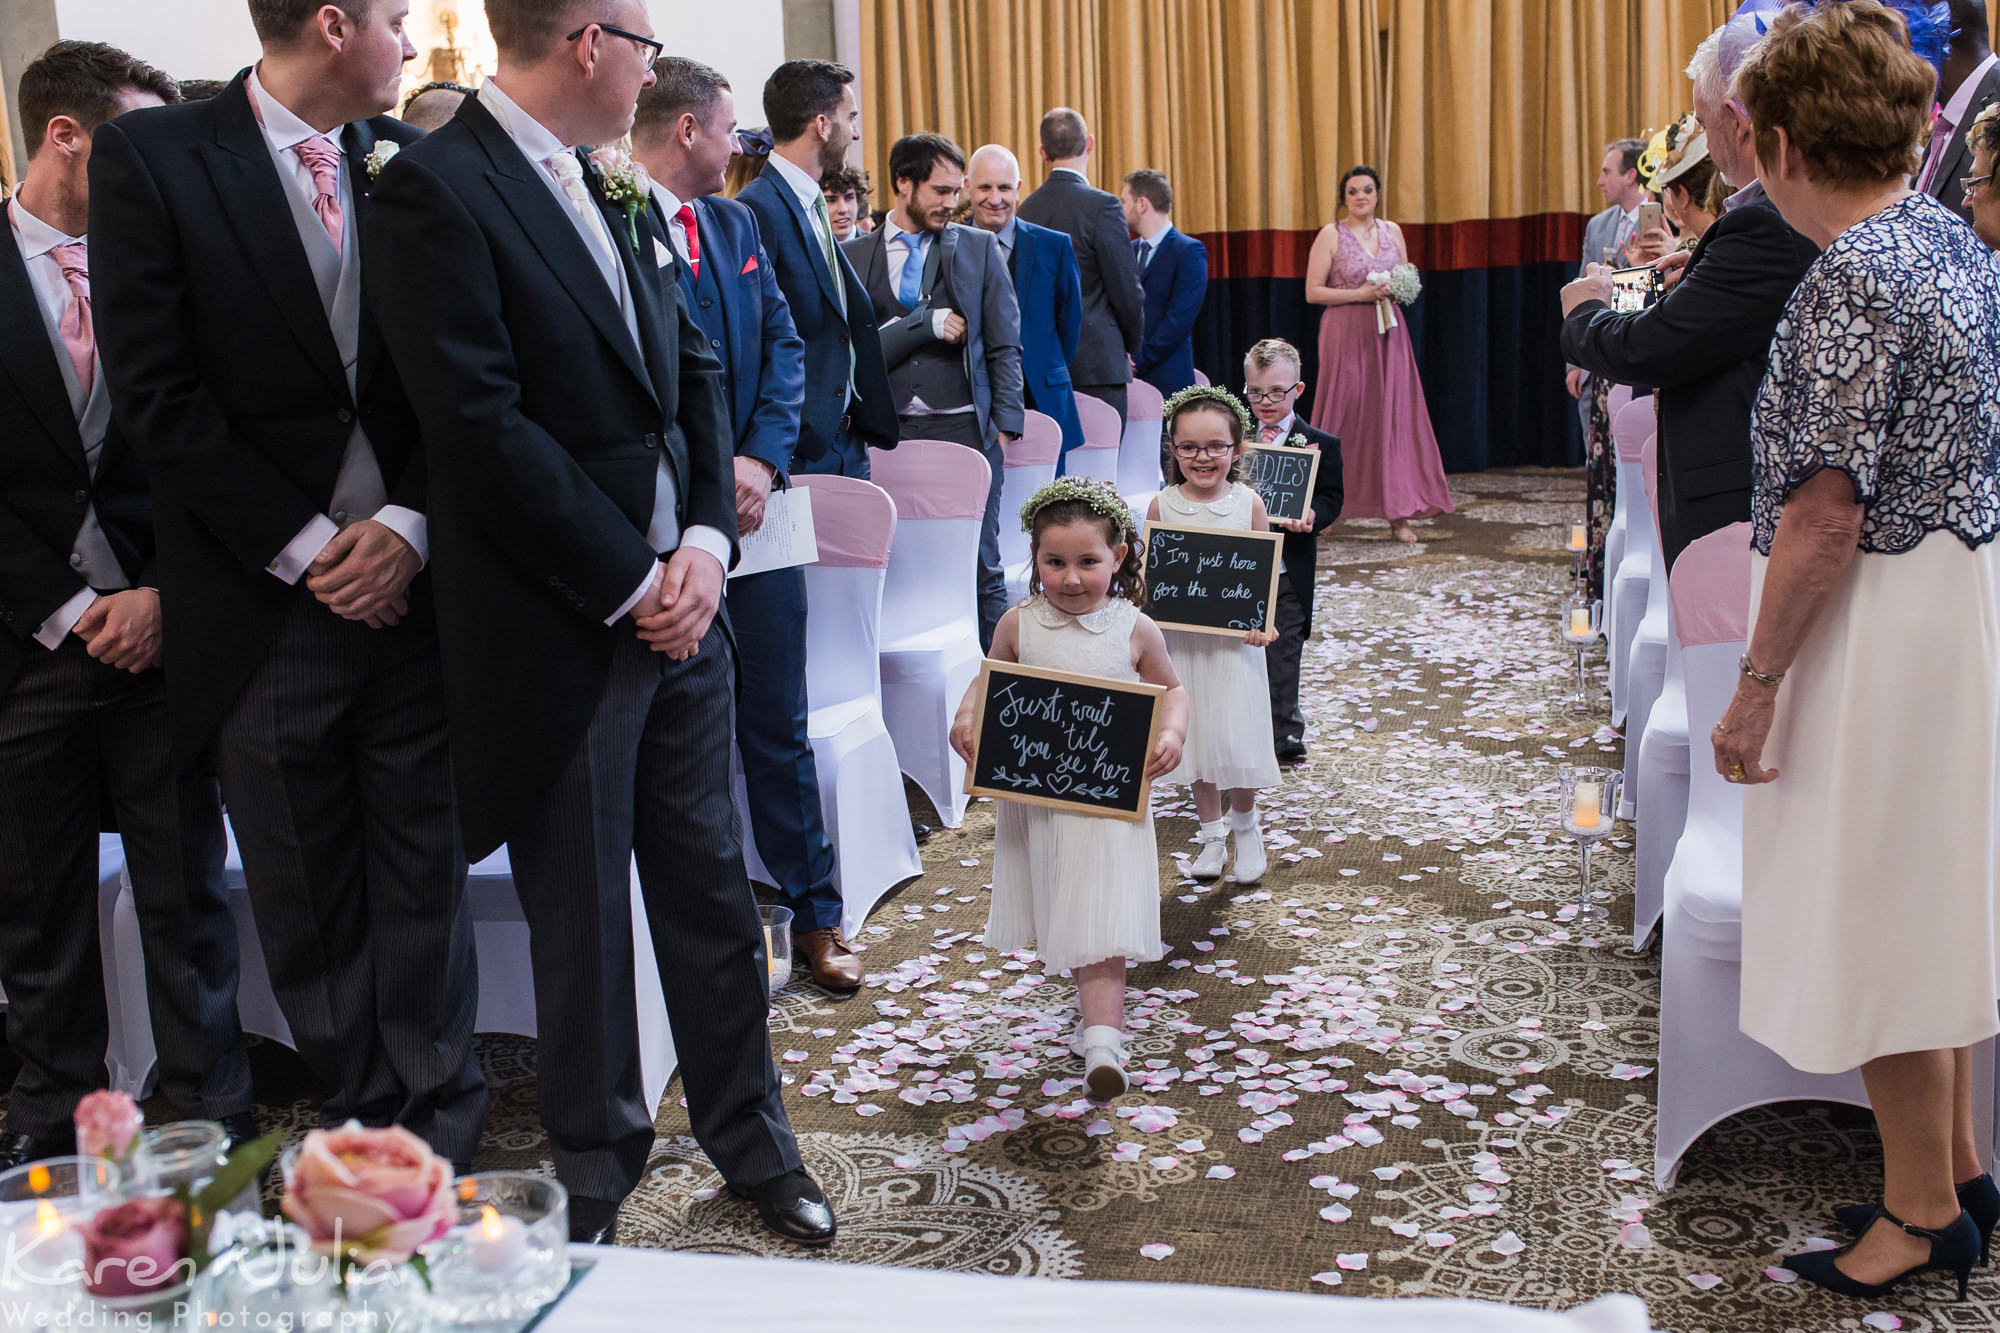 flowers girls walk down aisle carrying signs in the Tilden suite